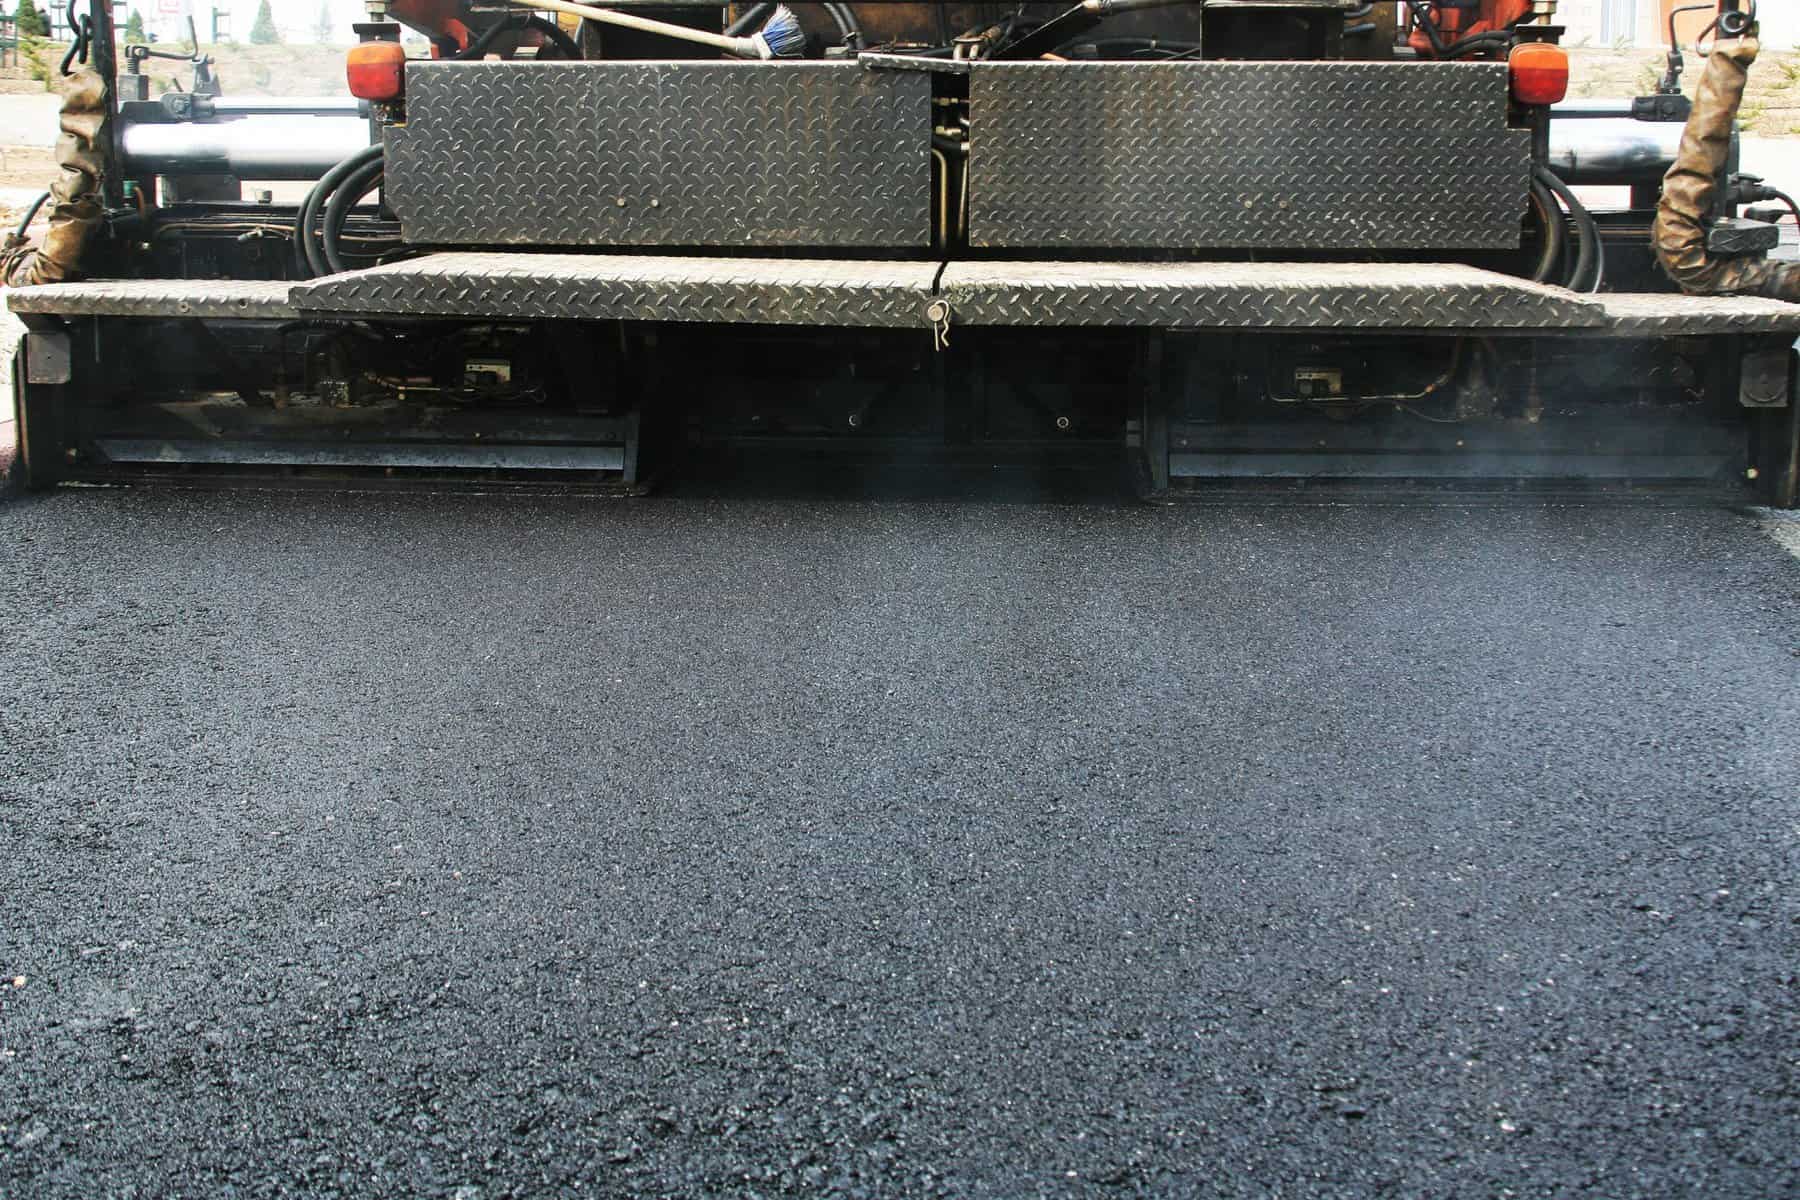 Because all asphalt pavements have a bridging function and are flexible, this parking lot may bear minor overloads without sustaining significant damage.